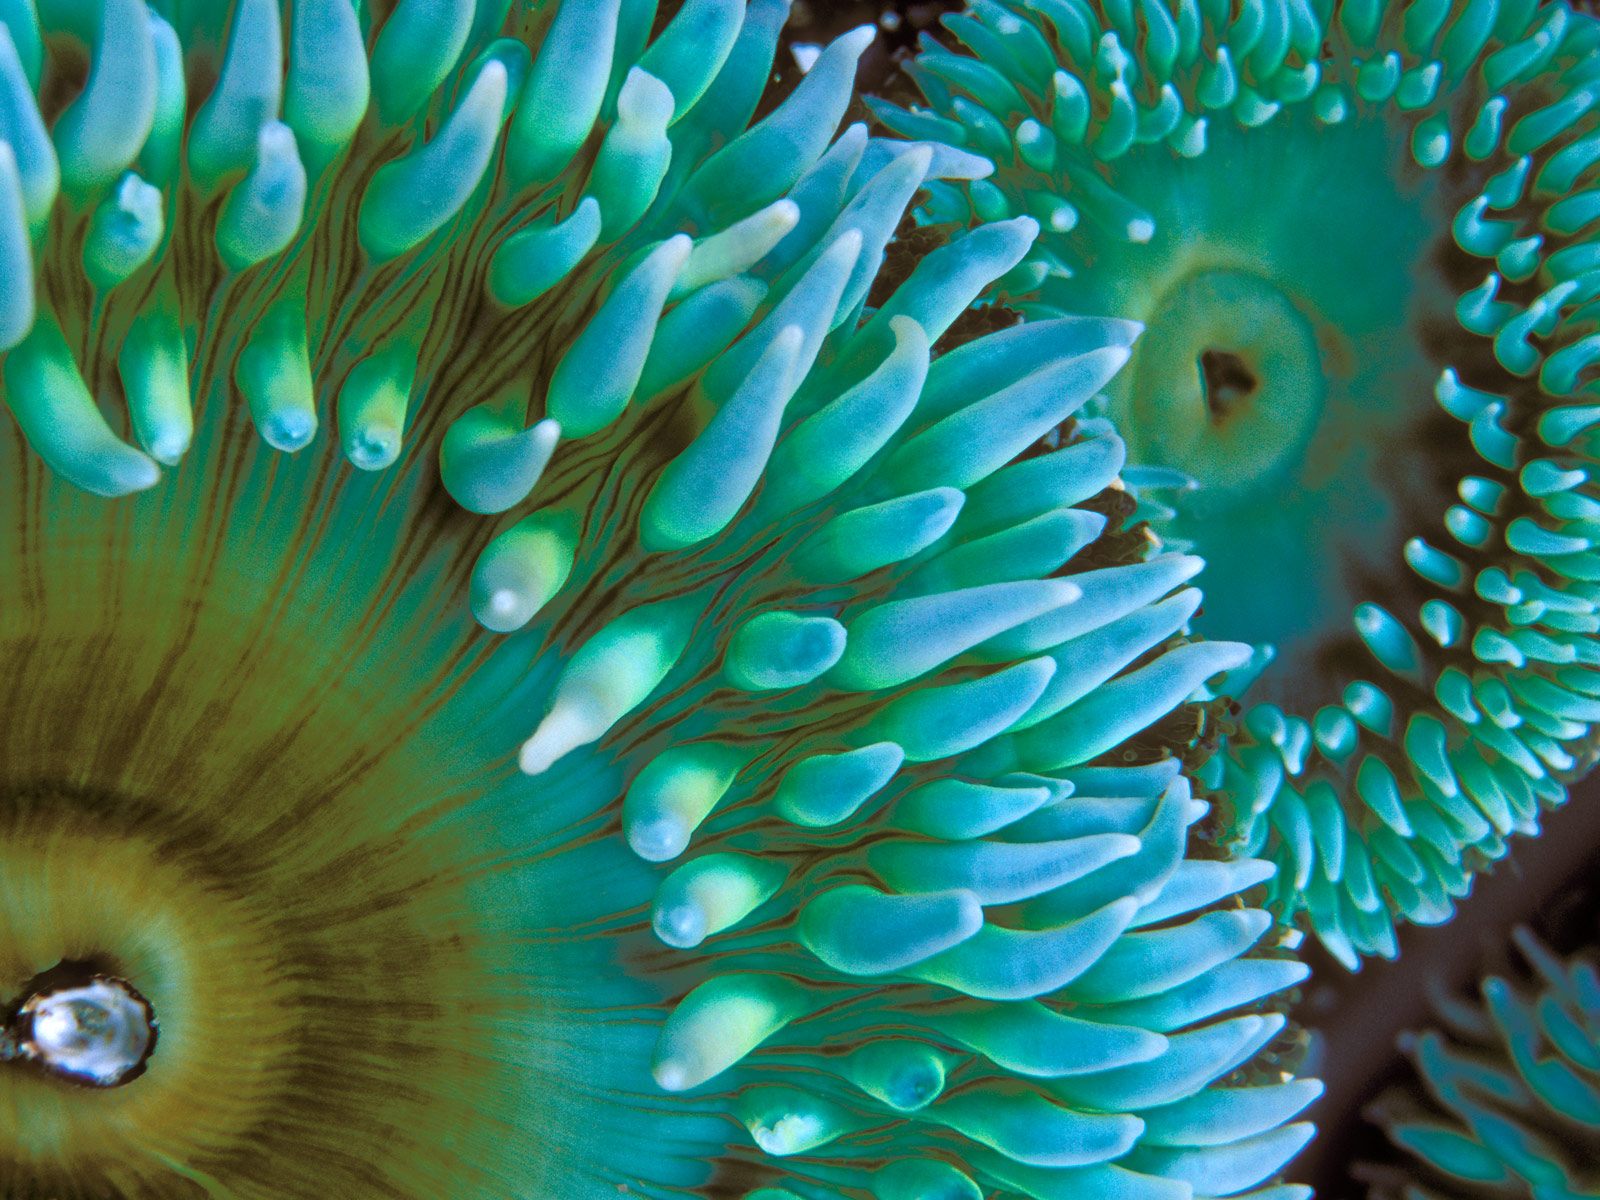 Free HQ Sea Anemone Wallpaper - Free HQ Backgrounds